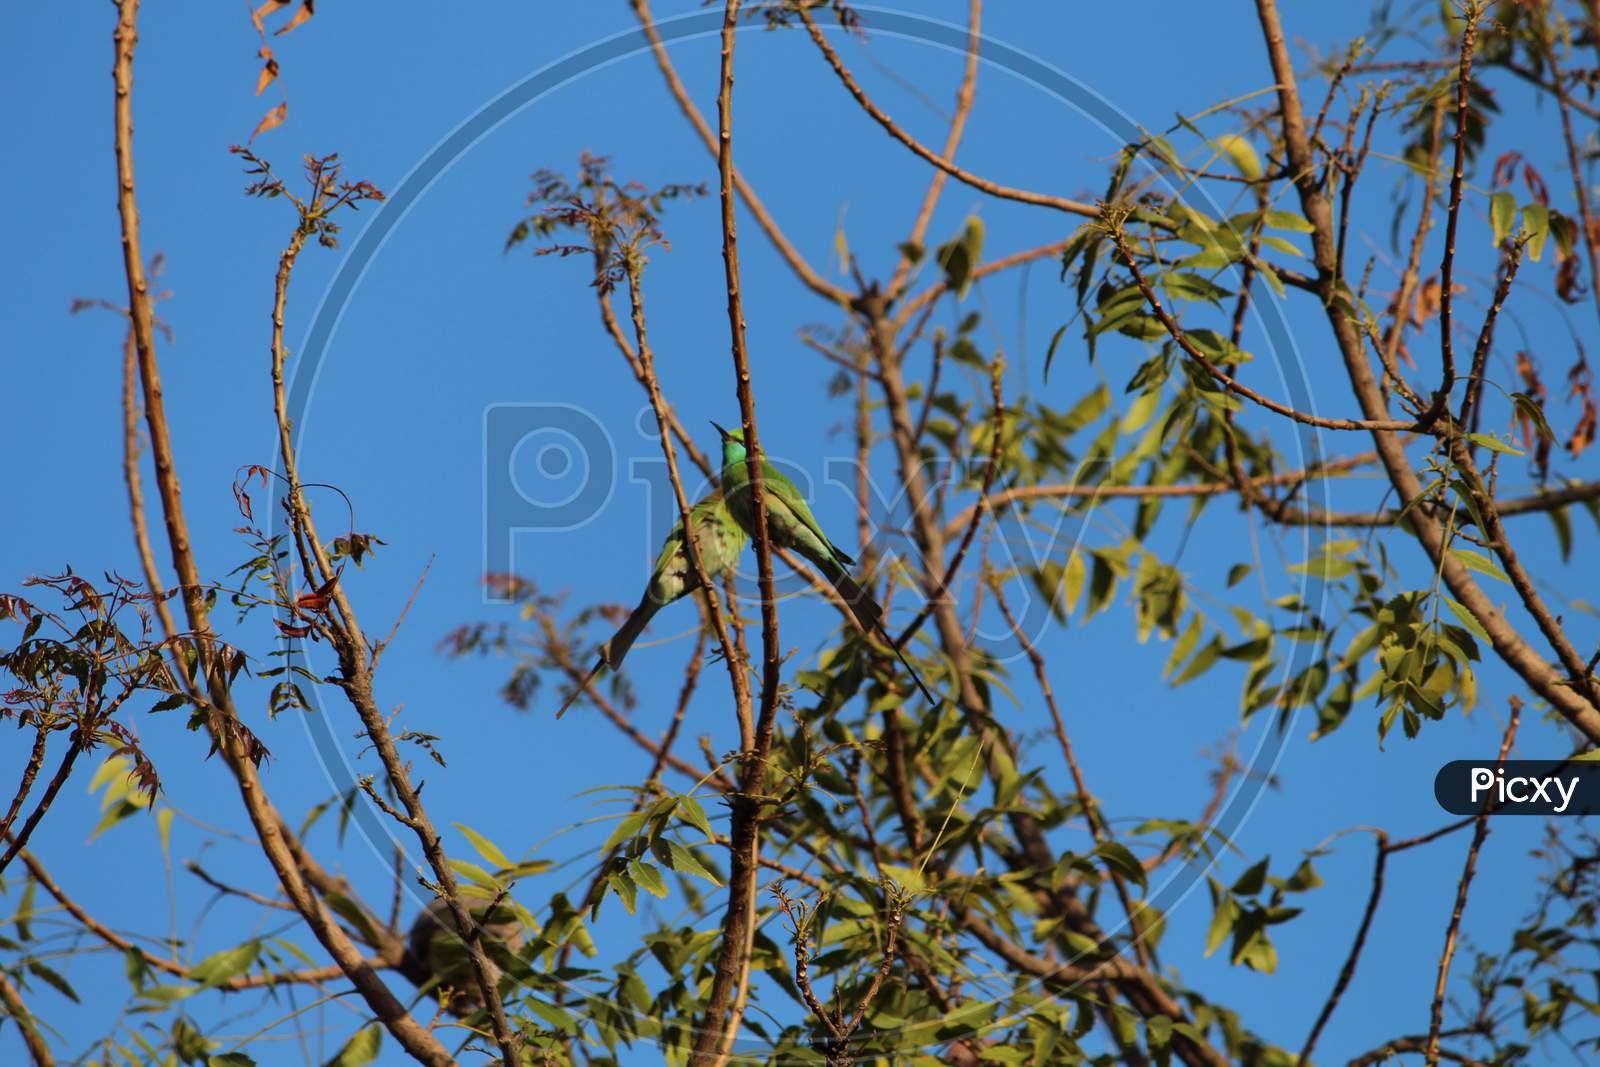 small green birds on the branches of a neem tree